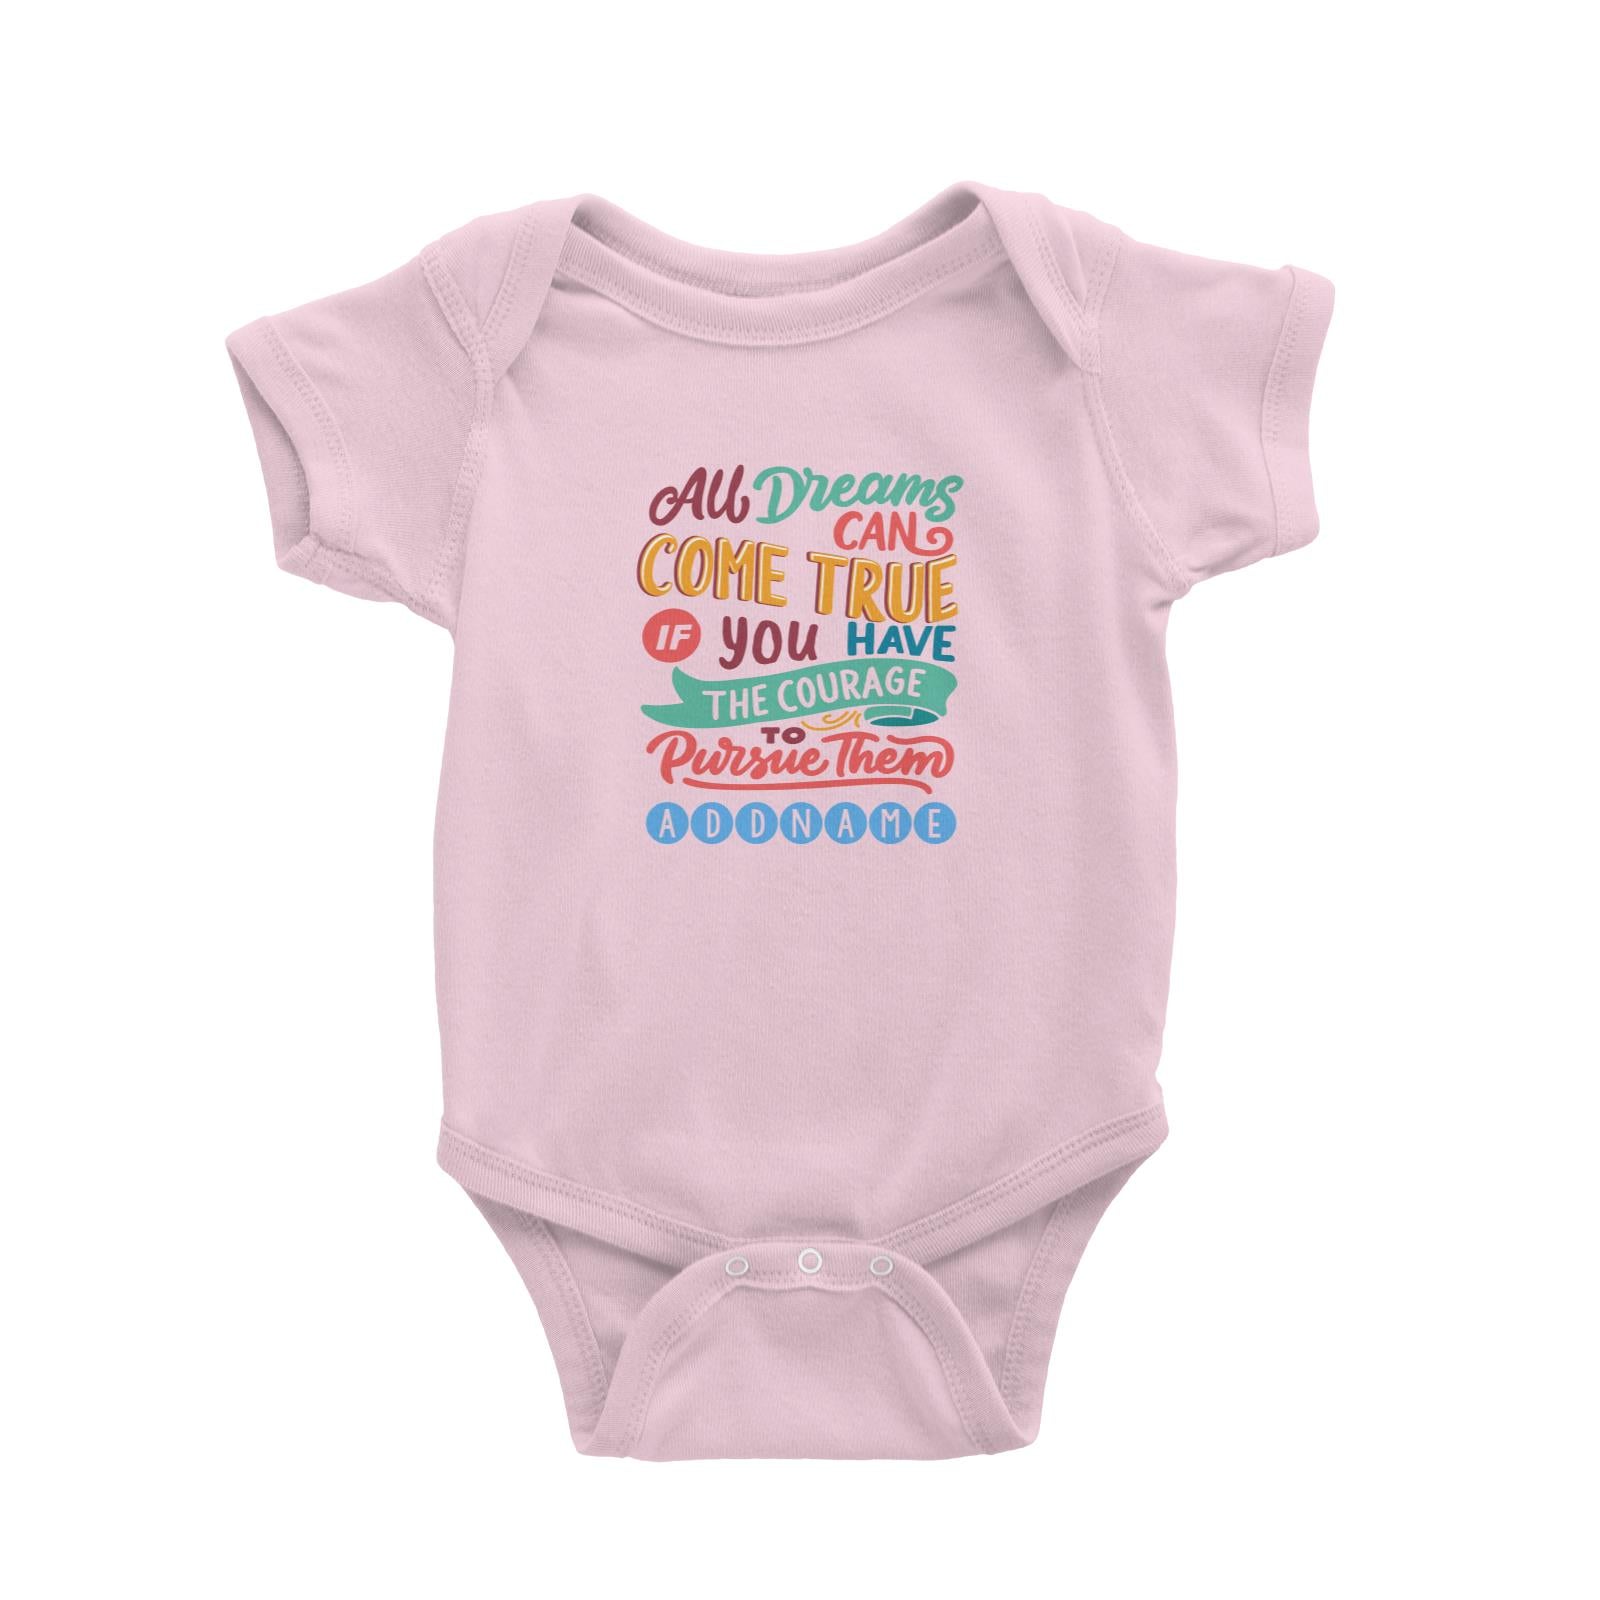 Children's Day Gift Series All Dreams Can Come True Addname Baby Romper